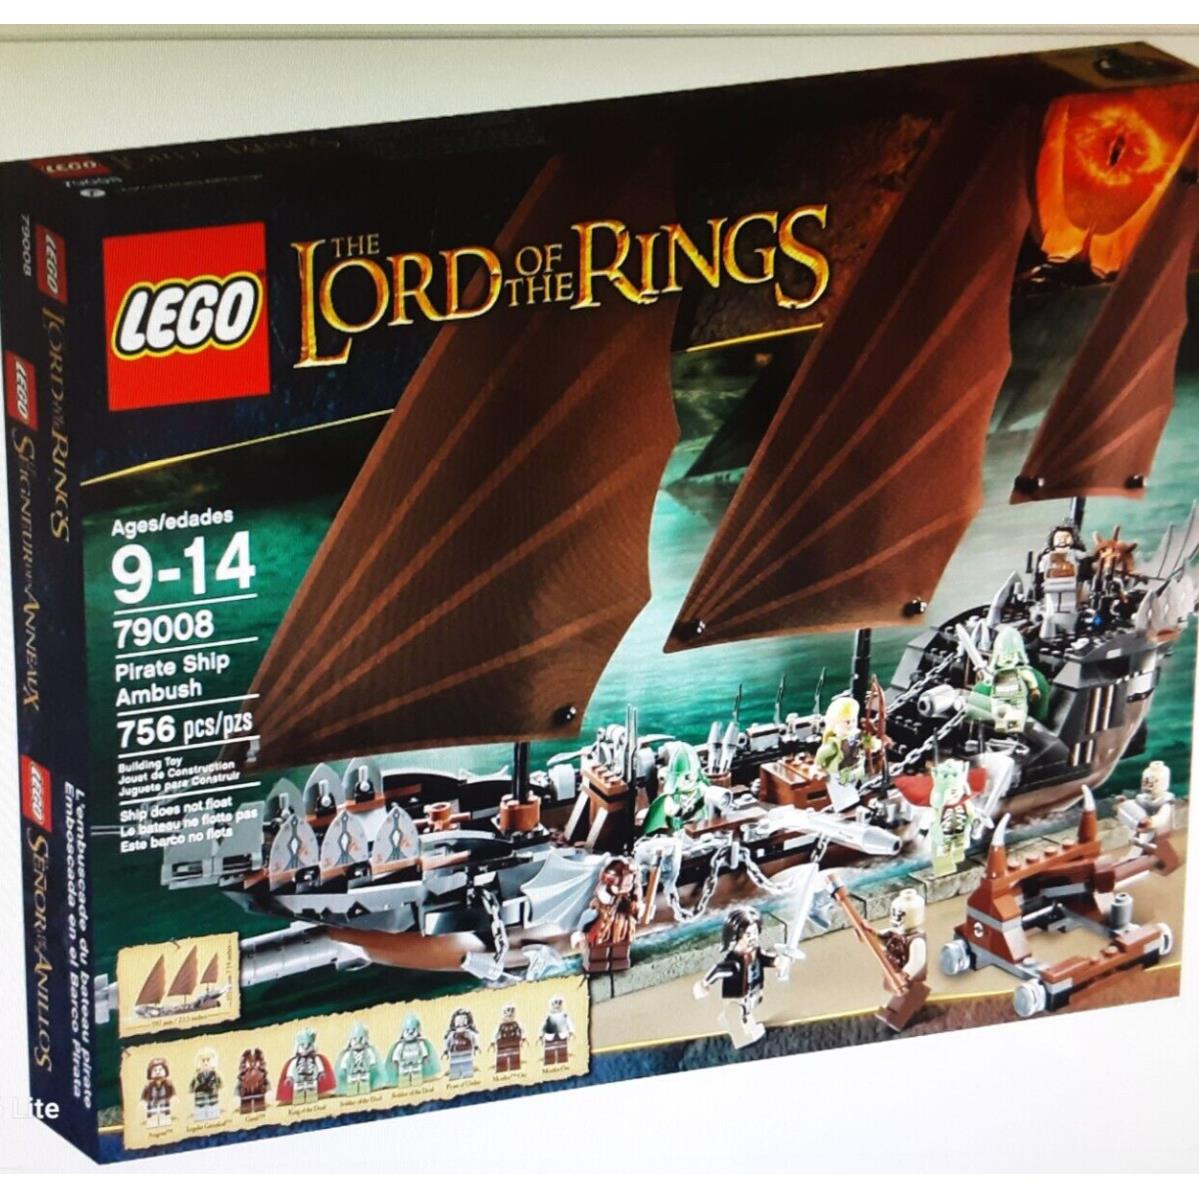 Lego The Lord of The Rings Pirate Ship Ambush 79008 In 2013